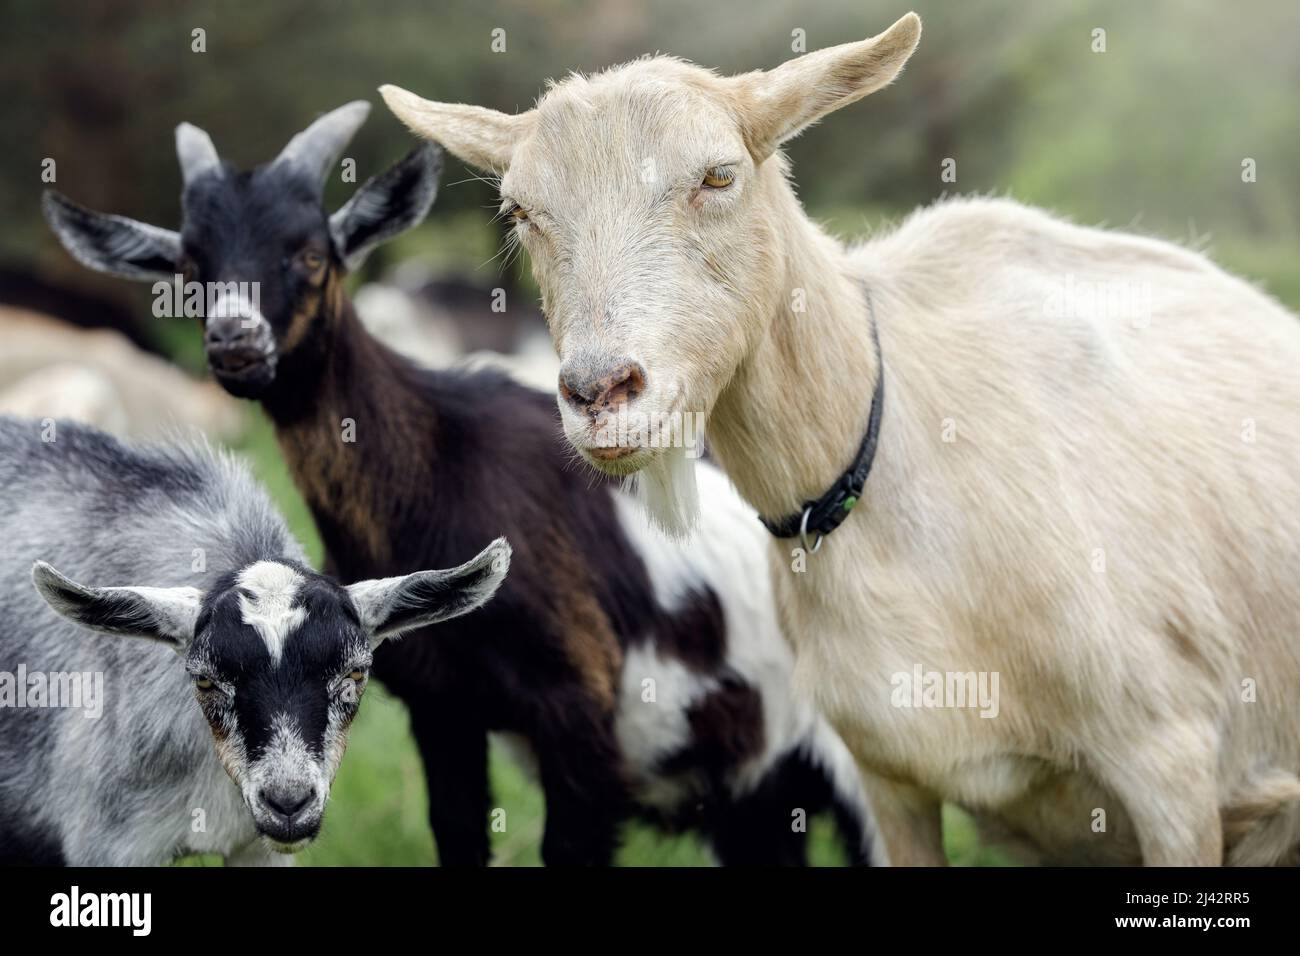 Flock of goats became very interested in the camera. Free-range goat grazing. Stock Photo